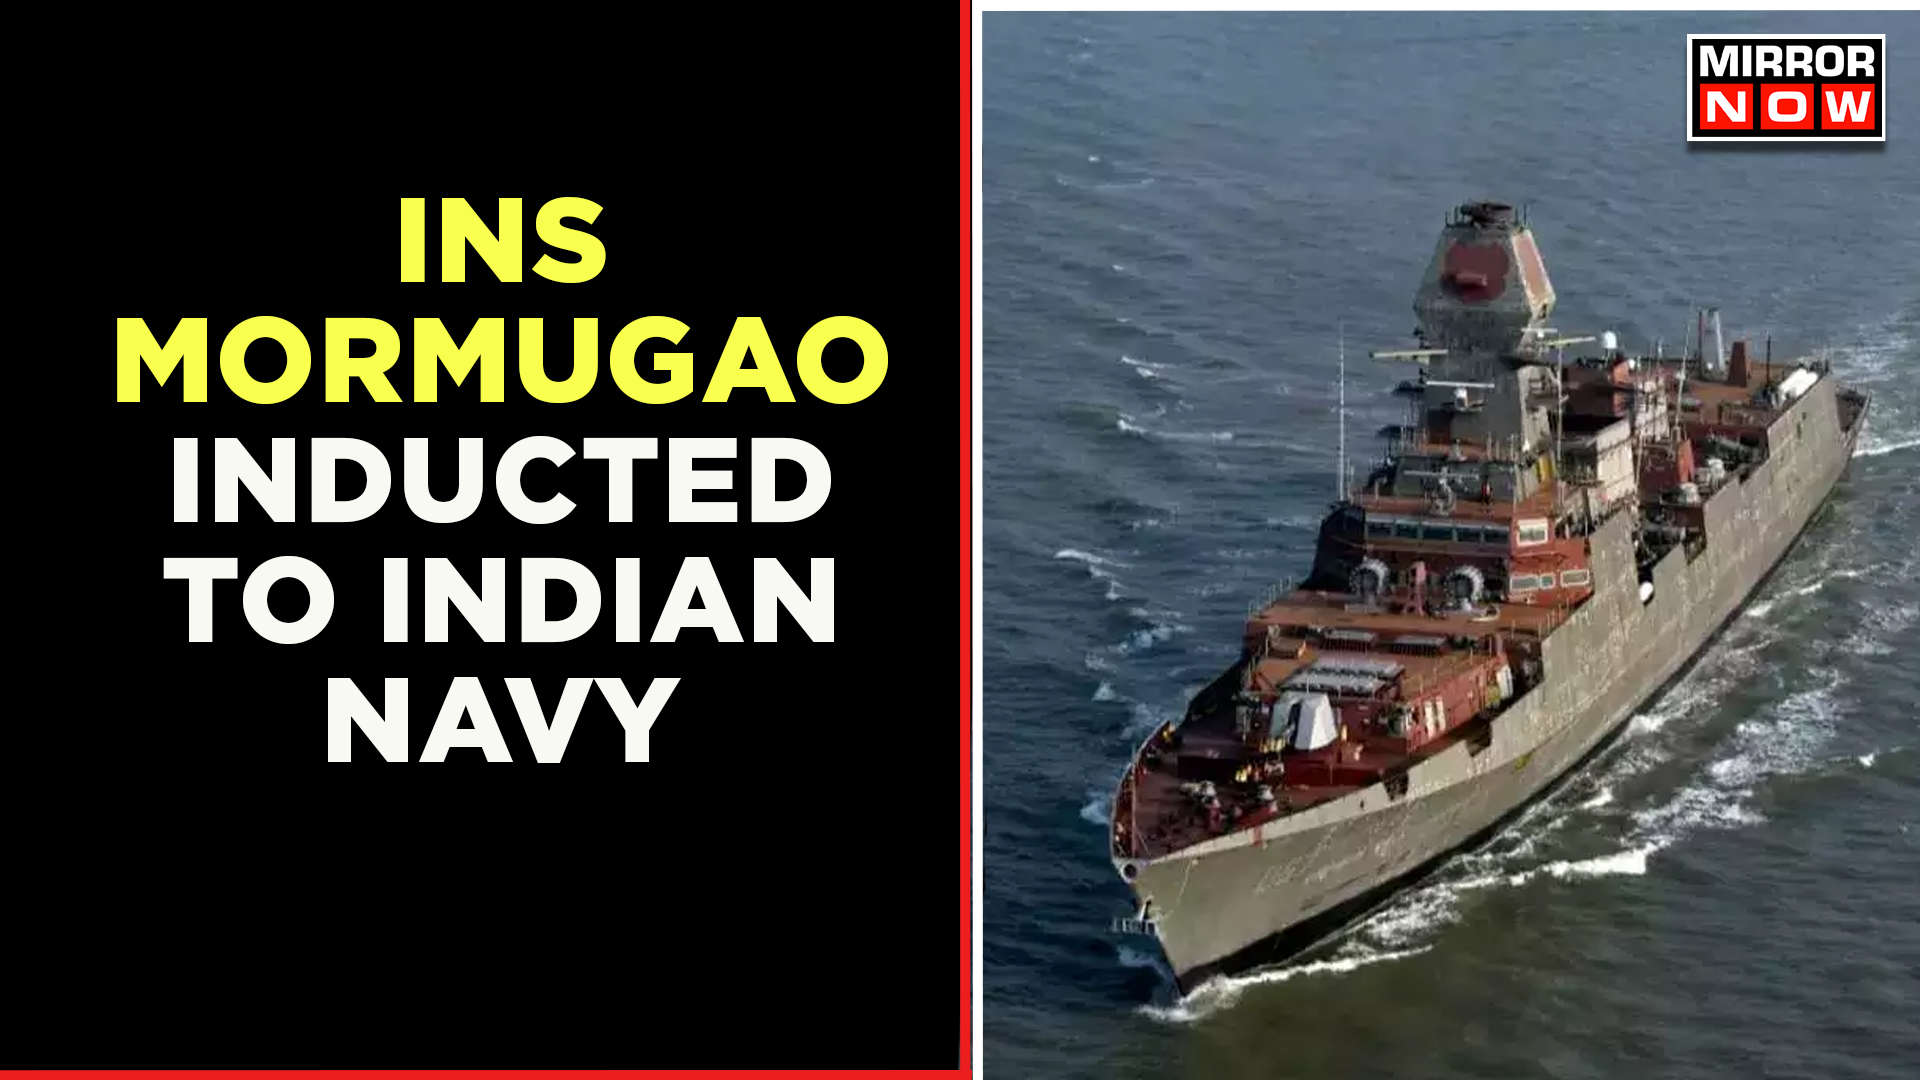 Indian Navy gets stealth guided missile destroyer INS Mormugao English News Mirror Now